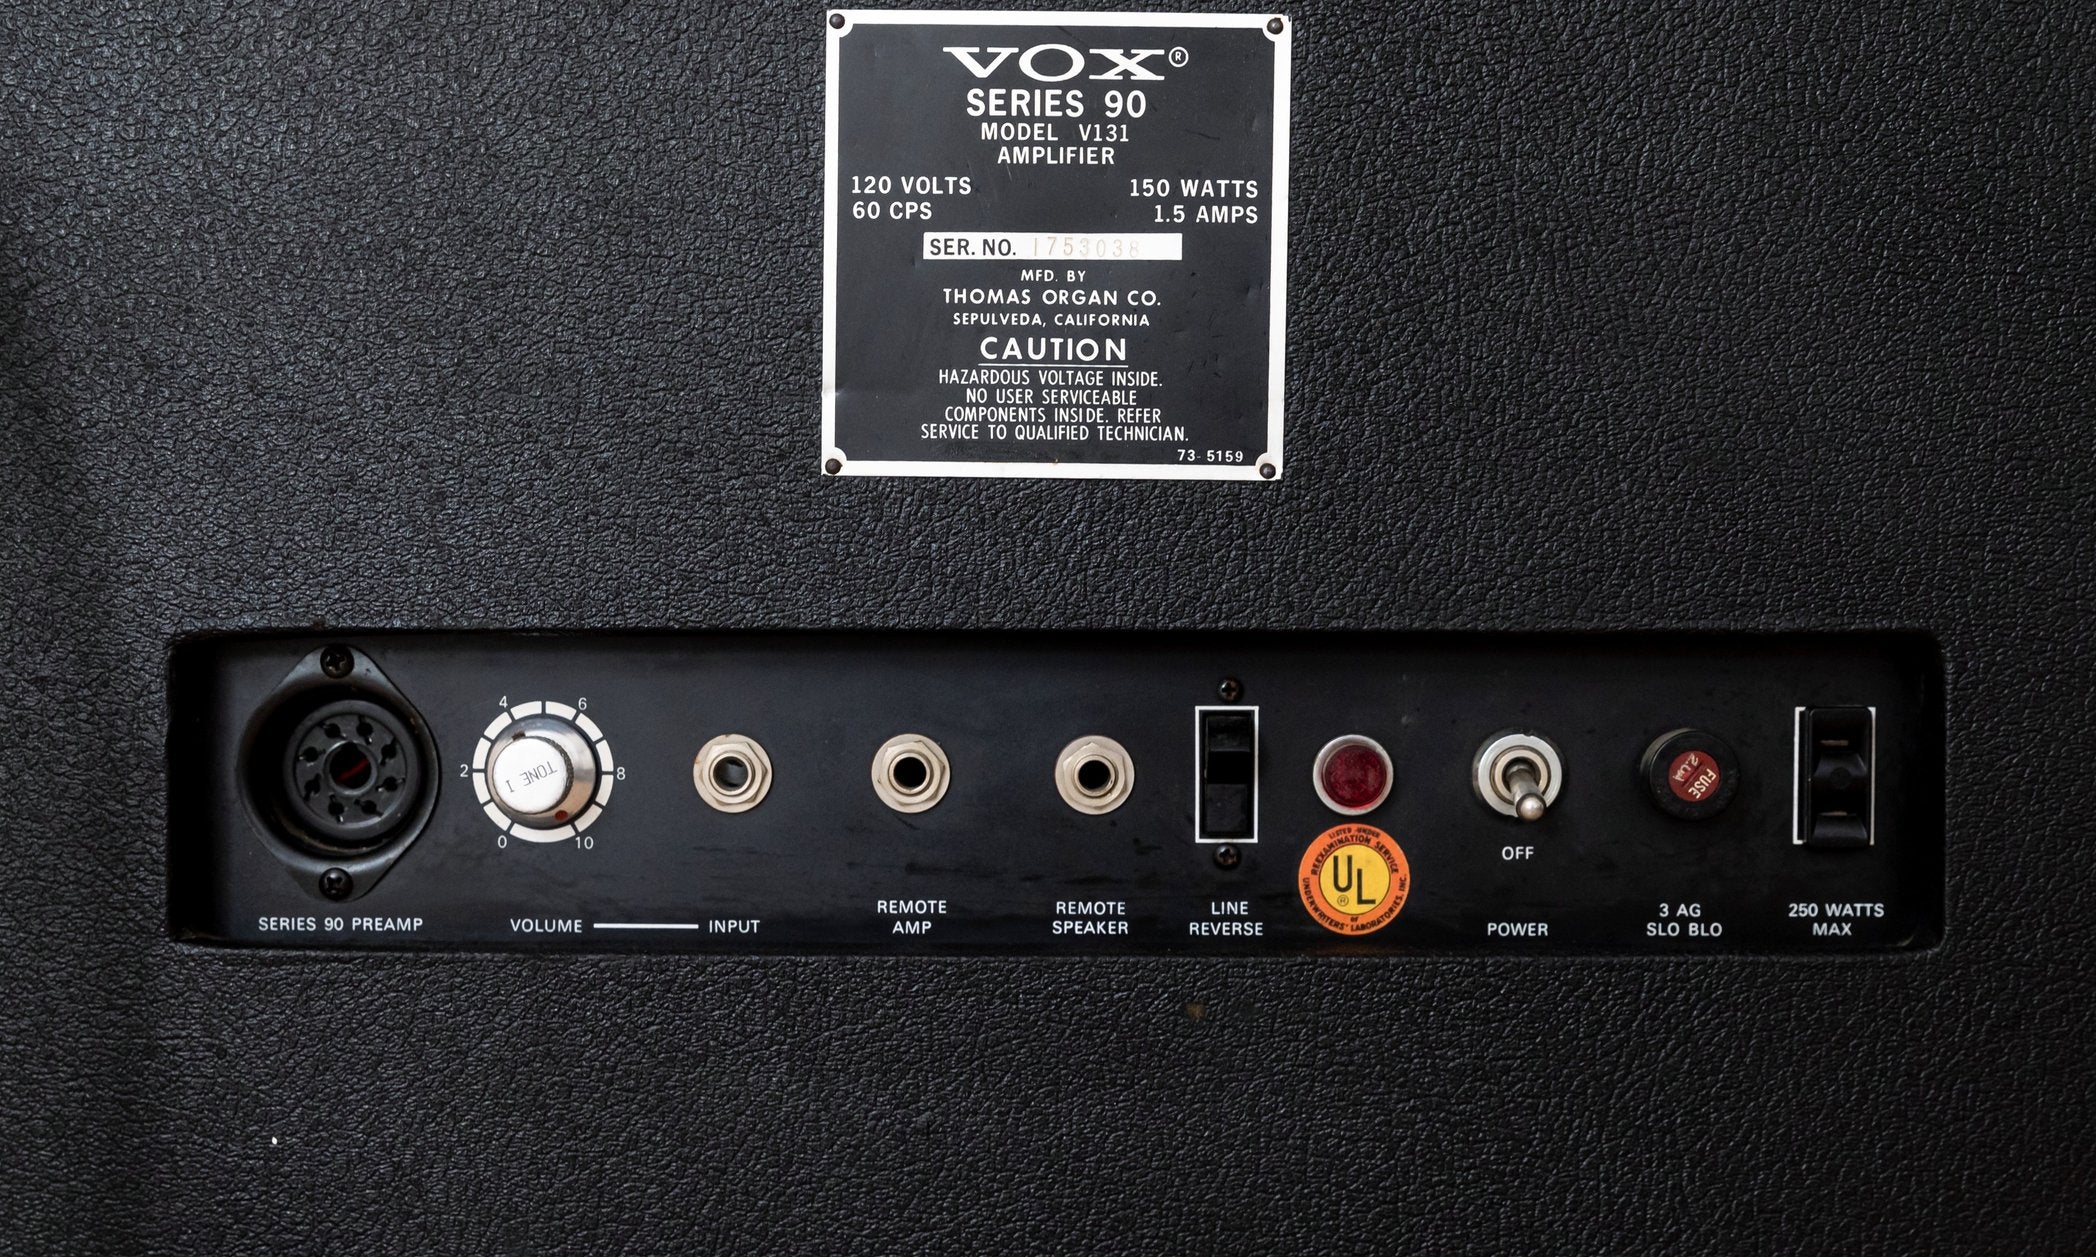 1969 Vox Series 90 Vintage Amp Head & Cab w/ Celestion Silver Bell T1656 Speakers